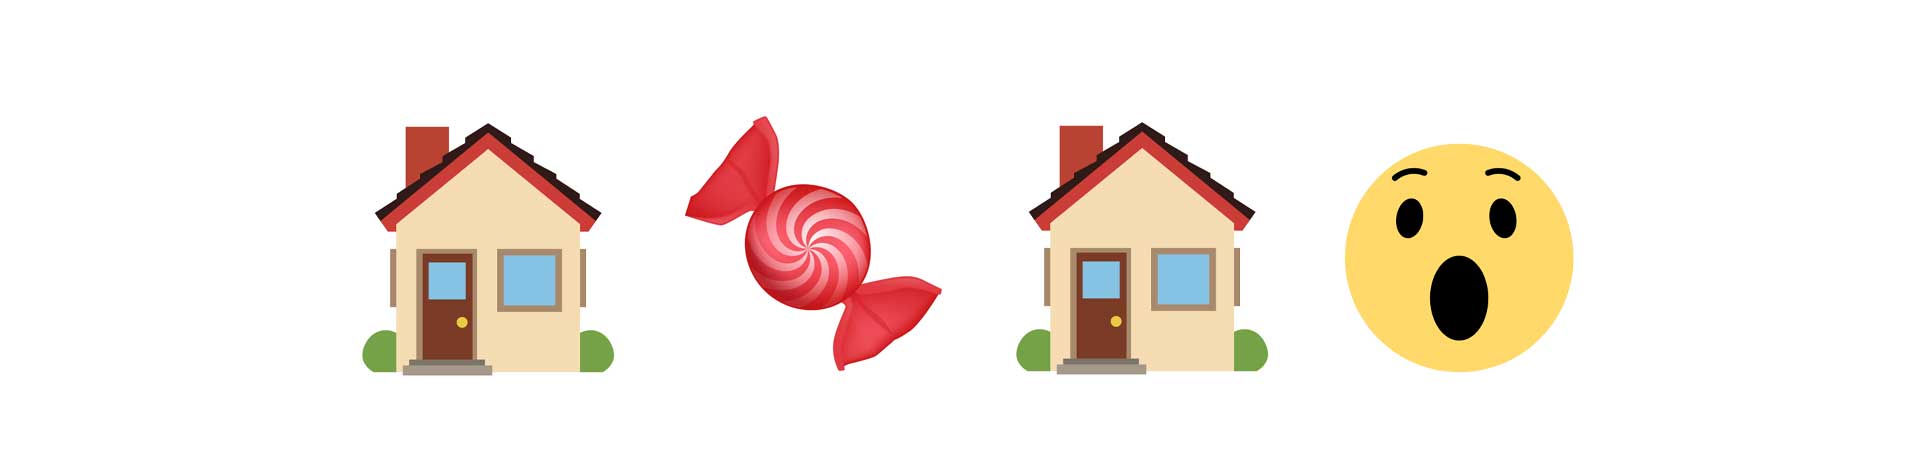 Two houses, a sweet and a shocked face emoji